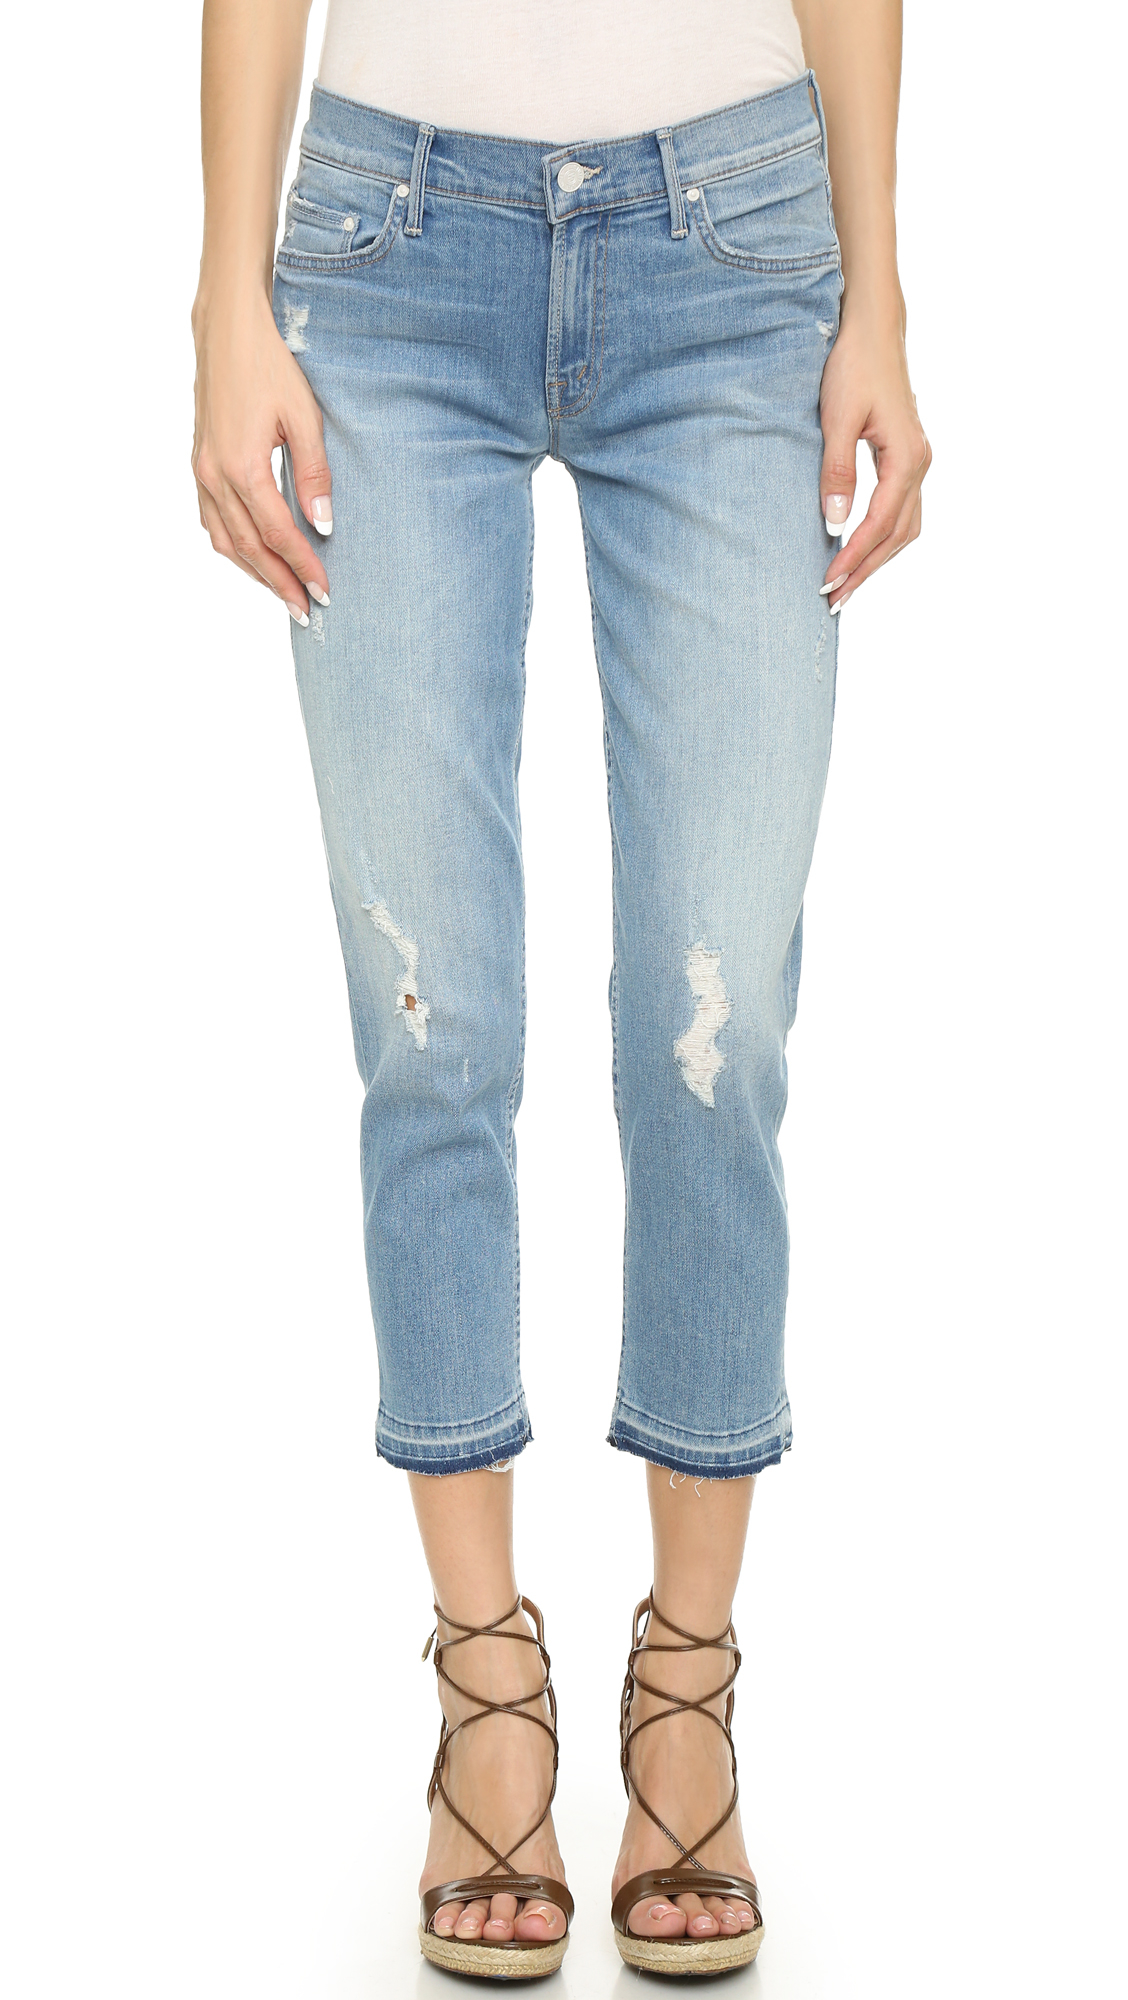 Lyst - Mother Dropout Jeans With Undone Hem - Cliffhanger in Blue